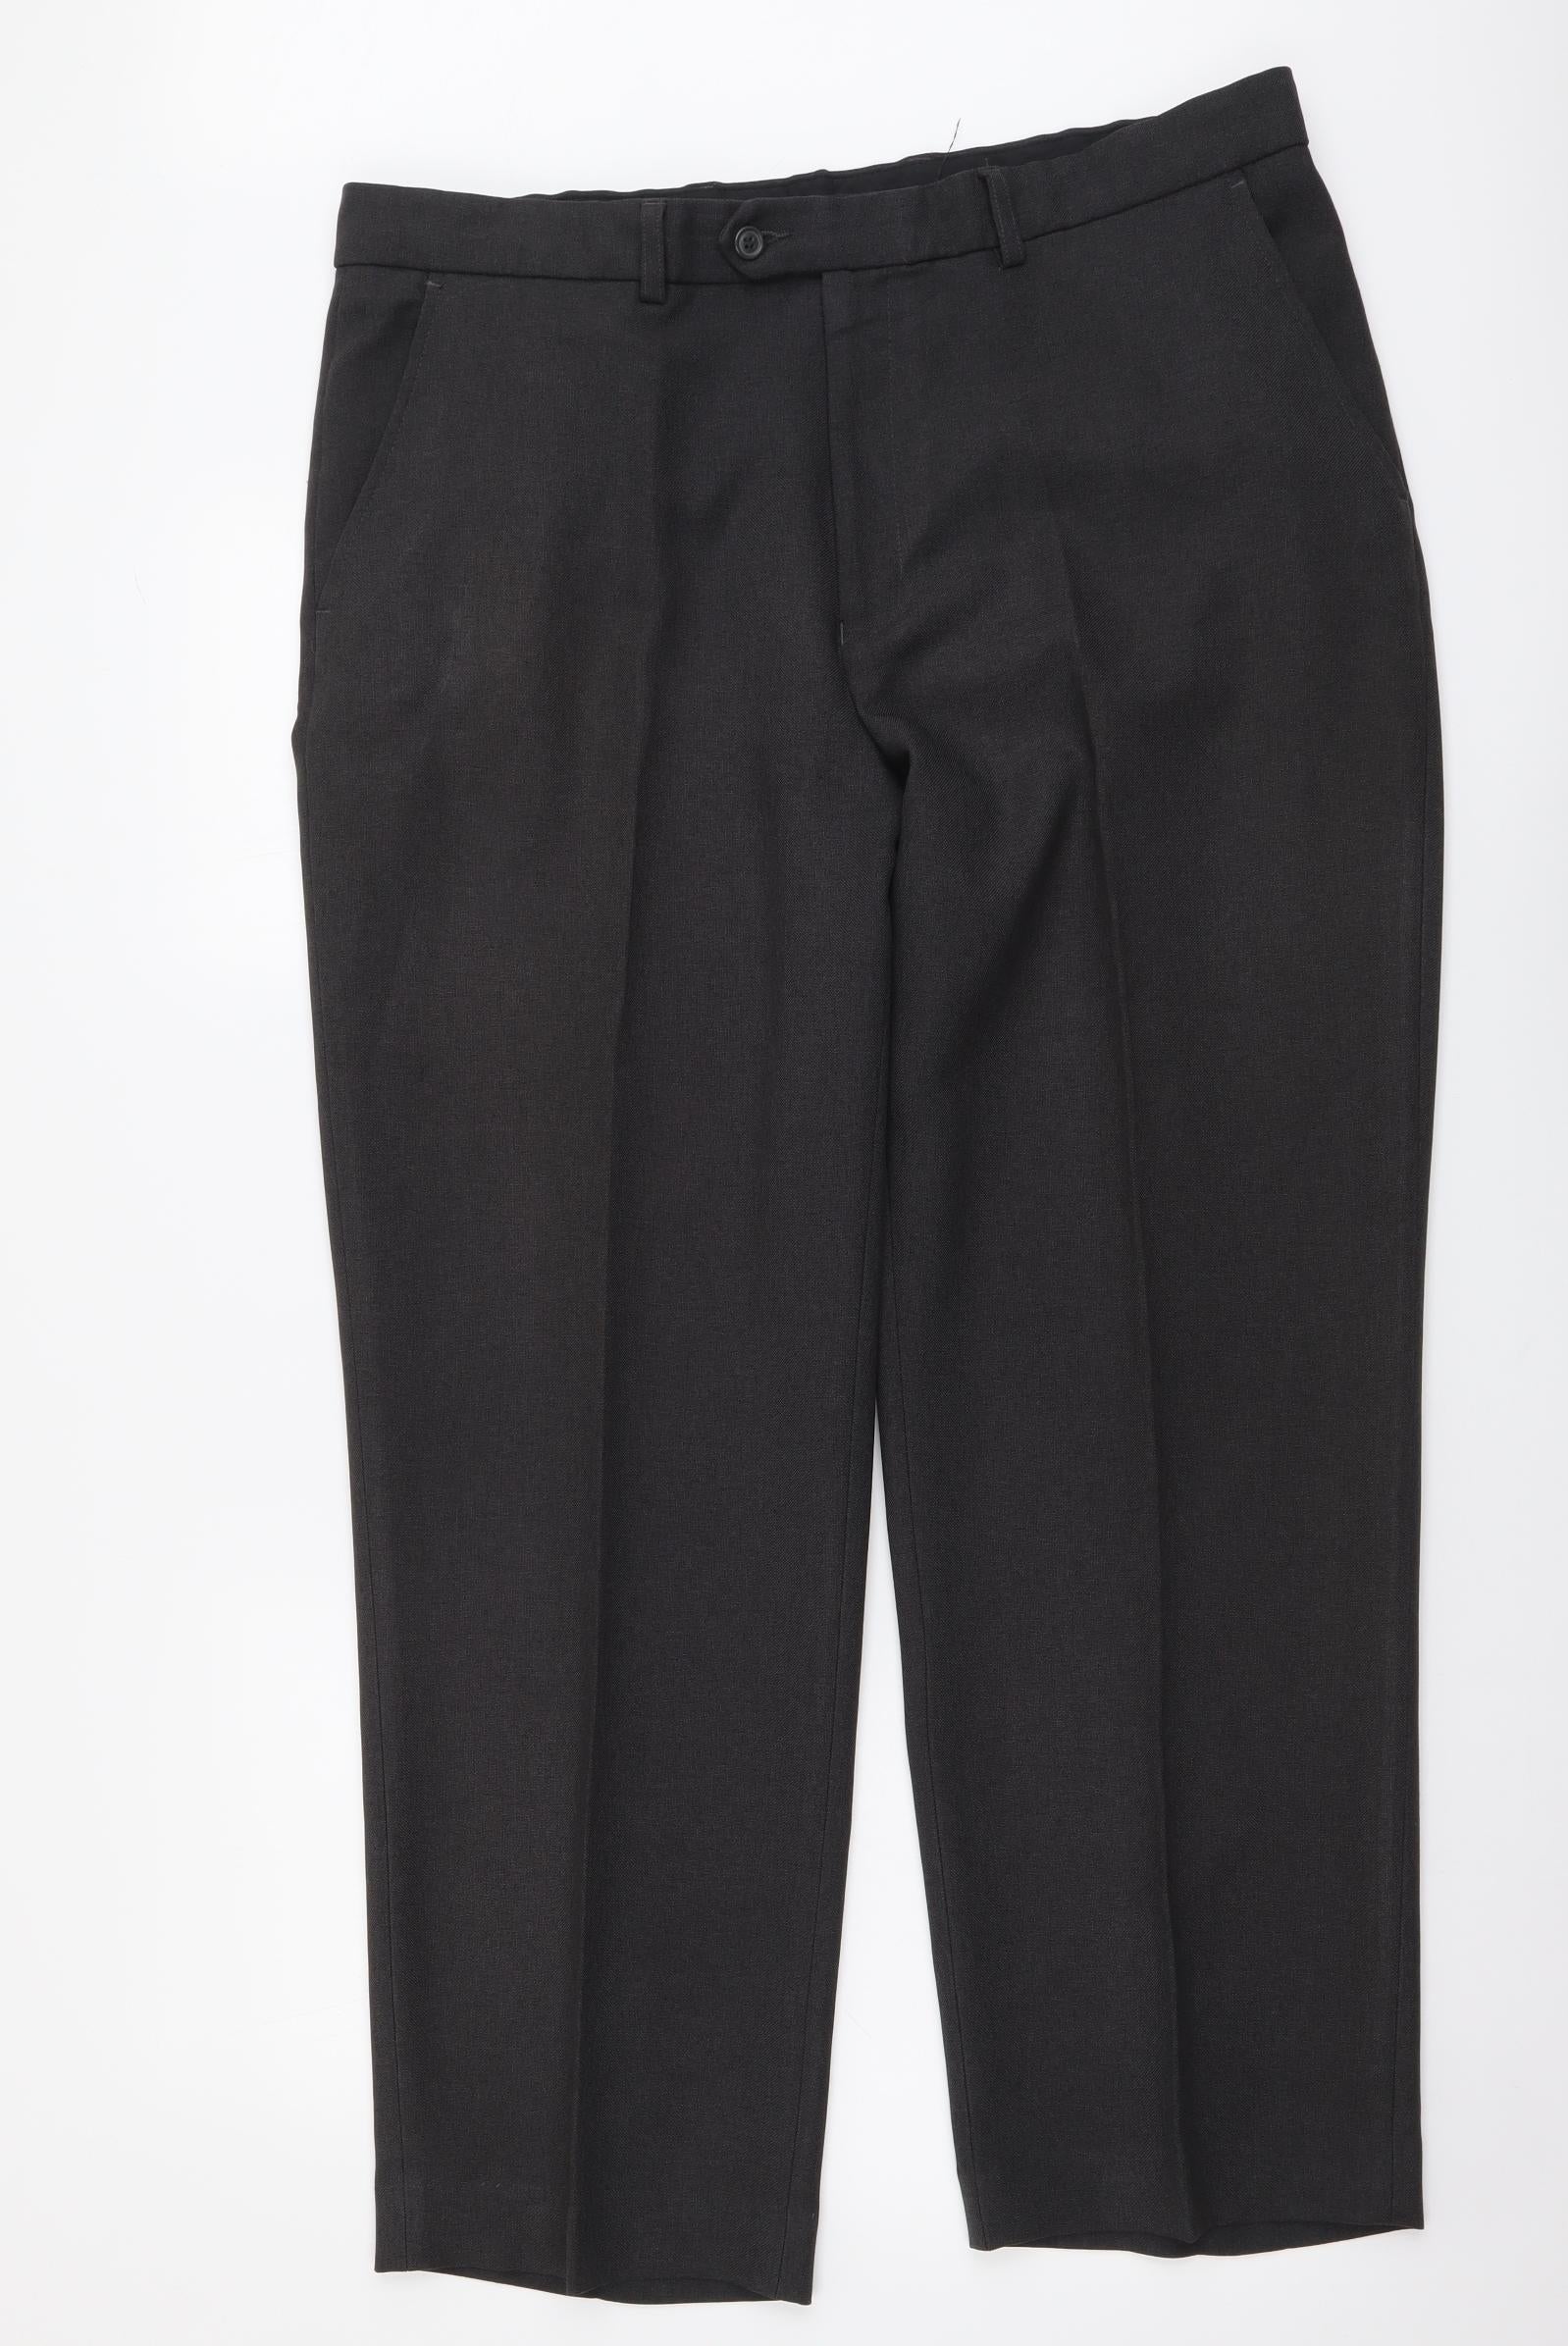 Navy Peached Slim Fit Cargo Trousers - Matalan